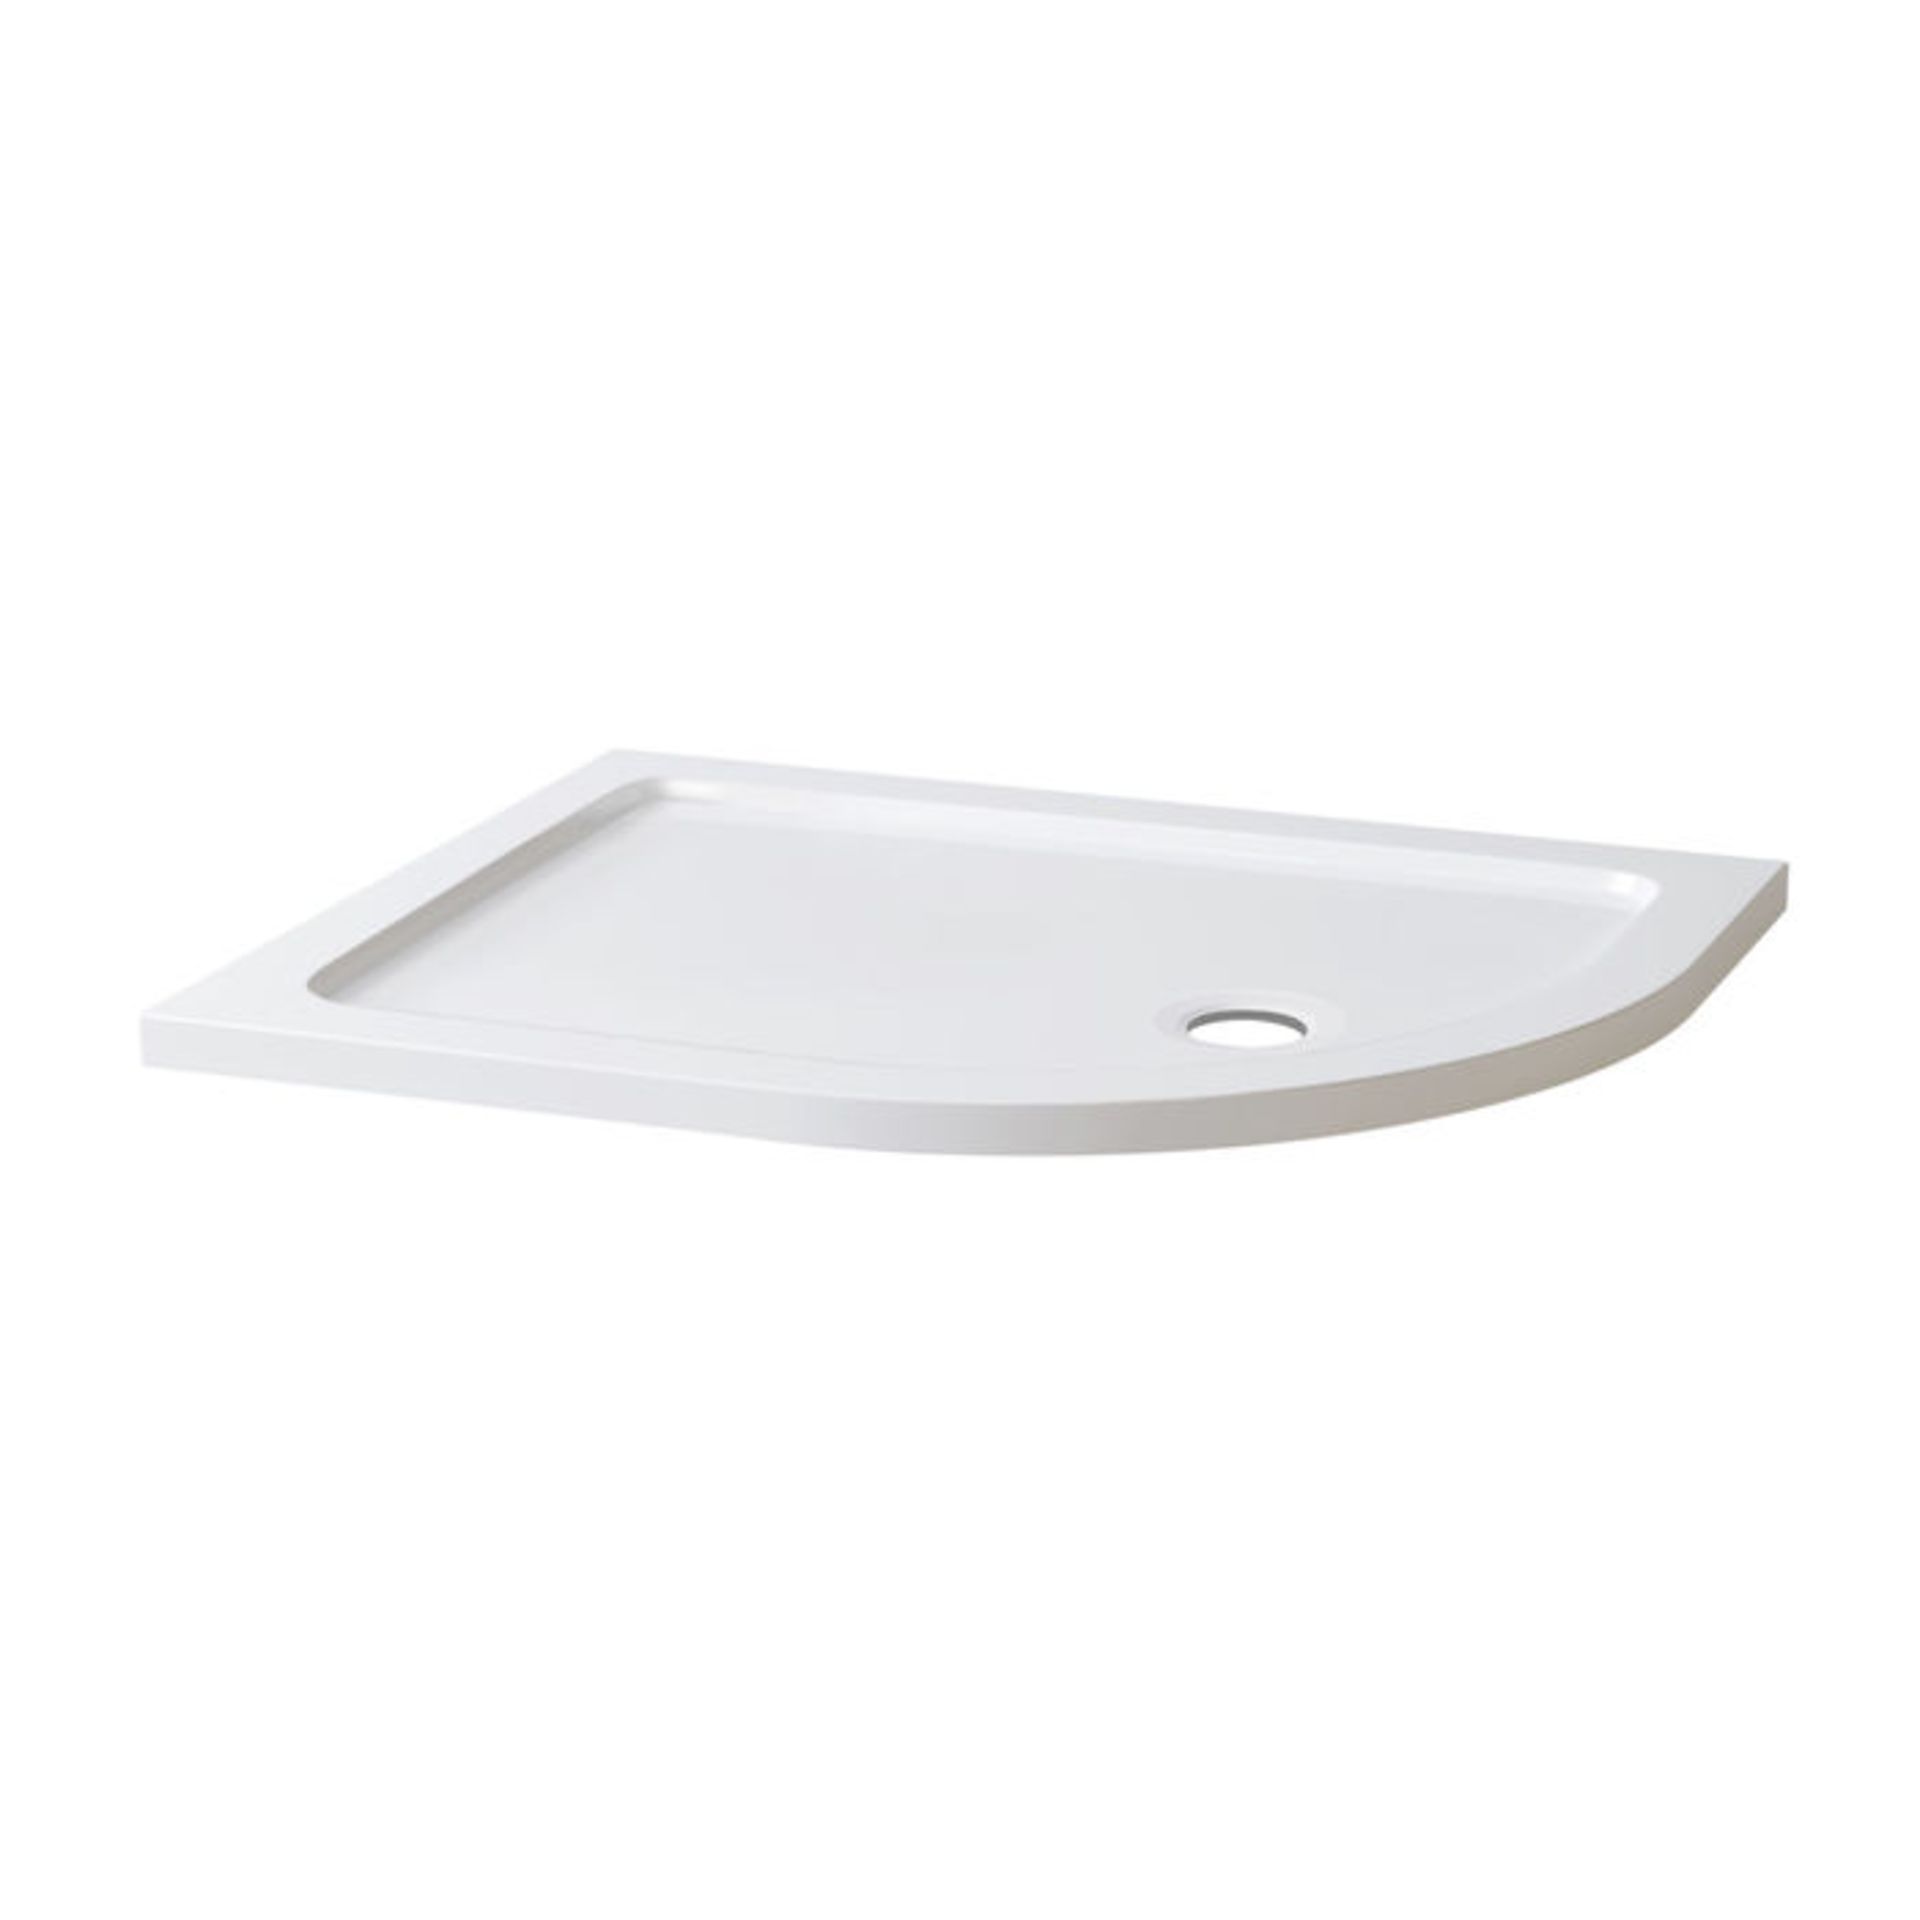 (AH84) 1000x800mm Offset Quadrant Ultraslim Stone Shower Tray - Right. RRP £249.99. Low profile - Image 2 of 2